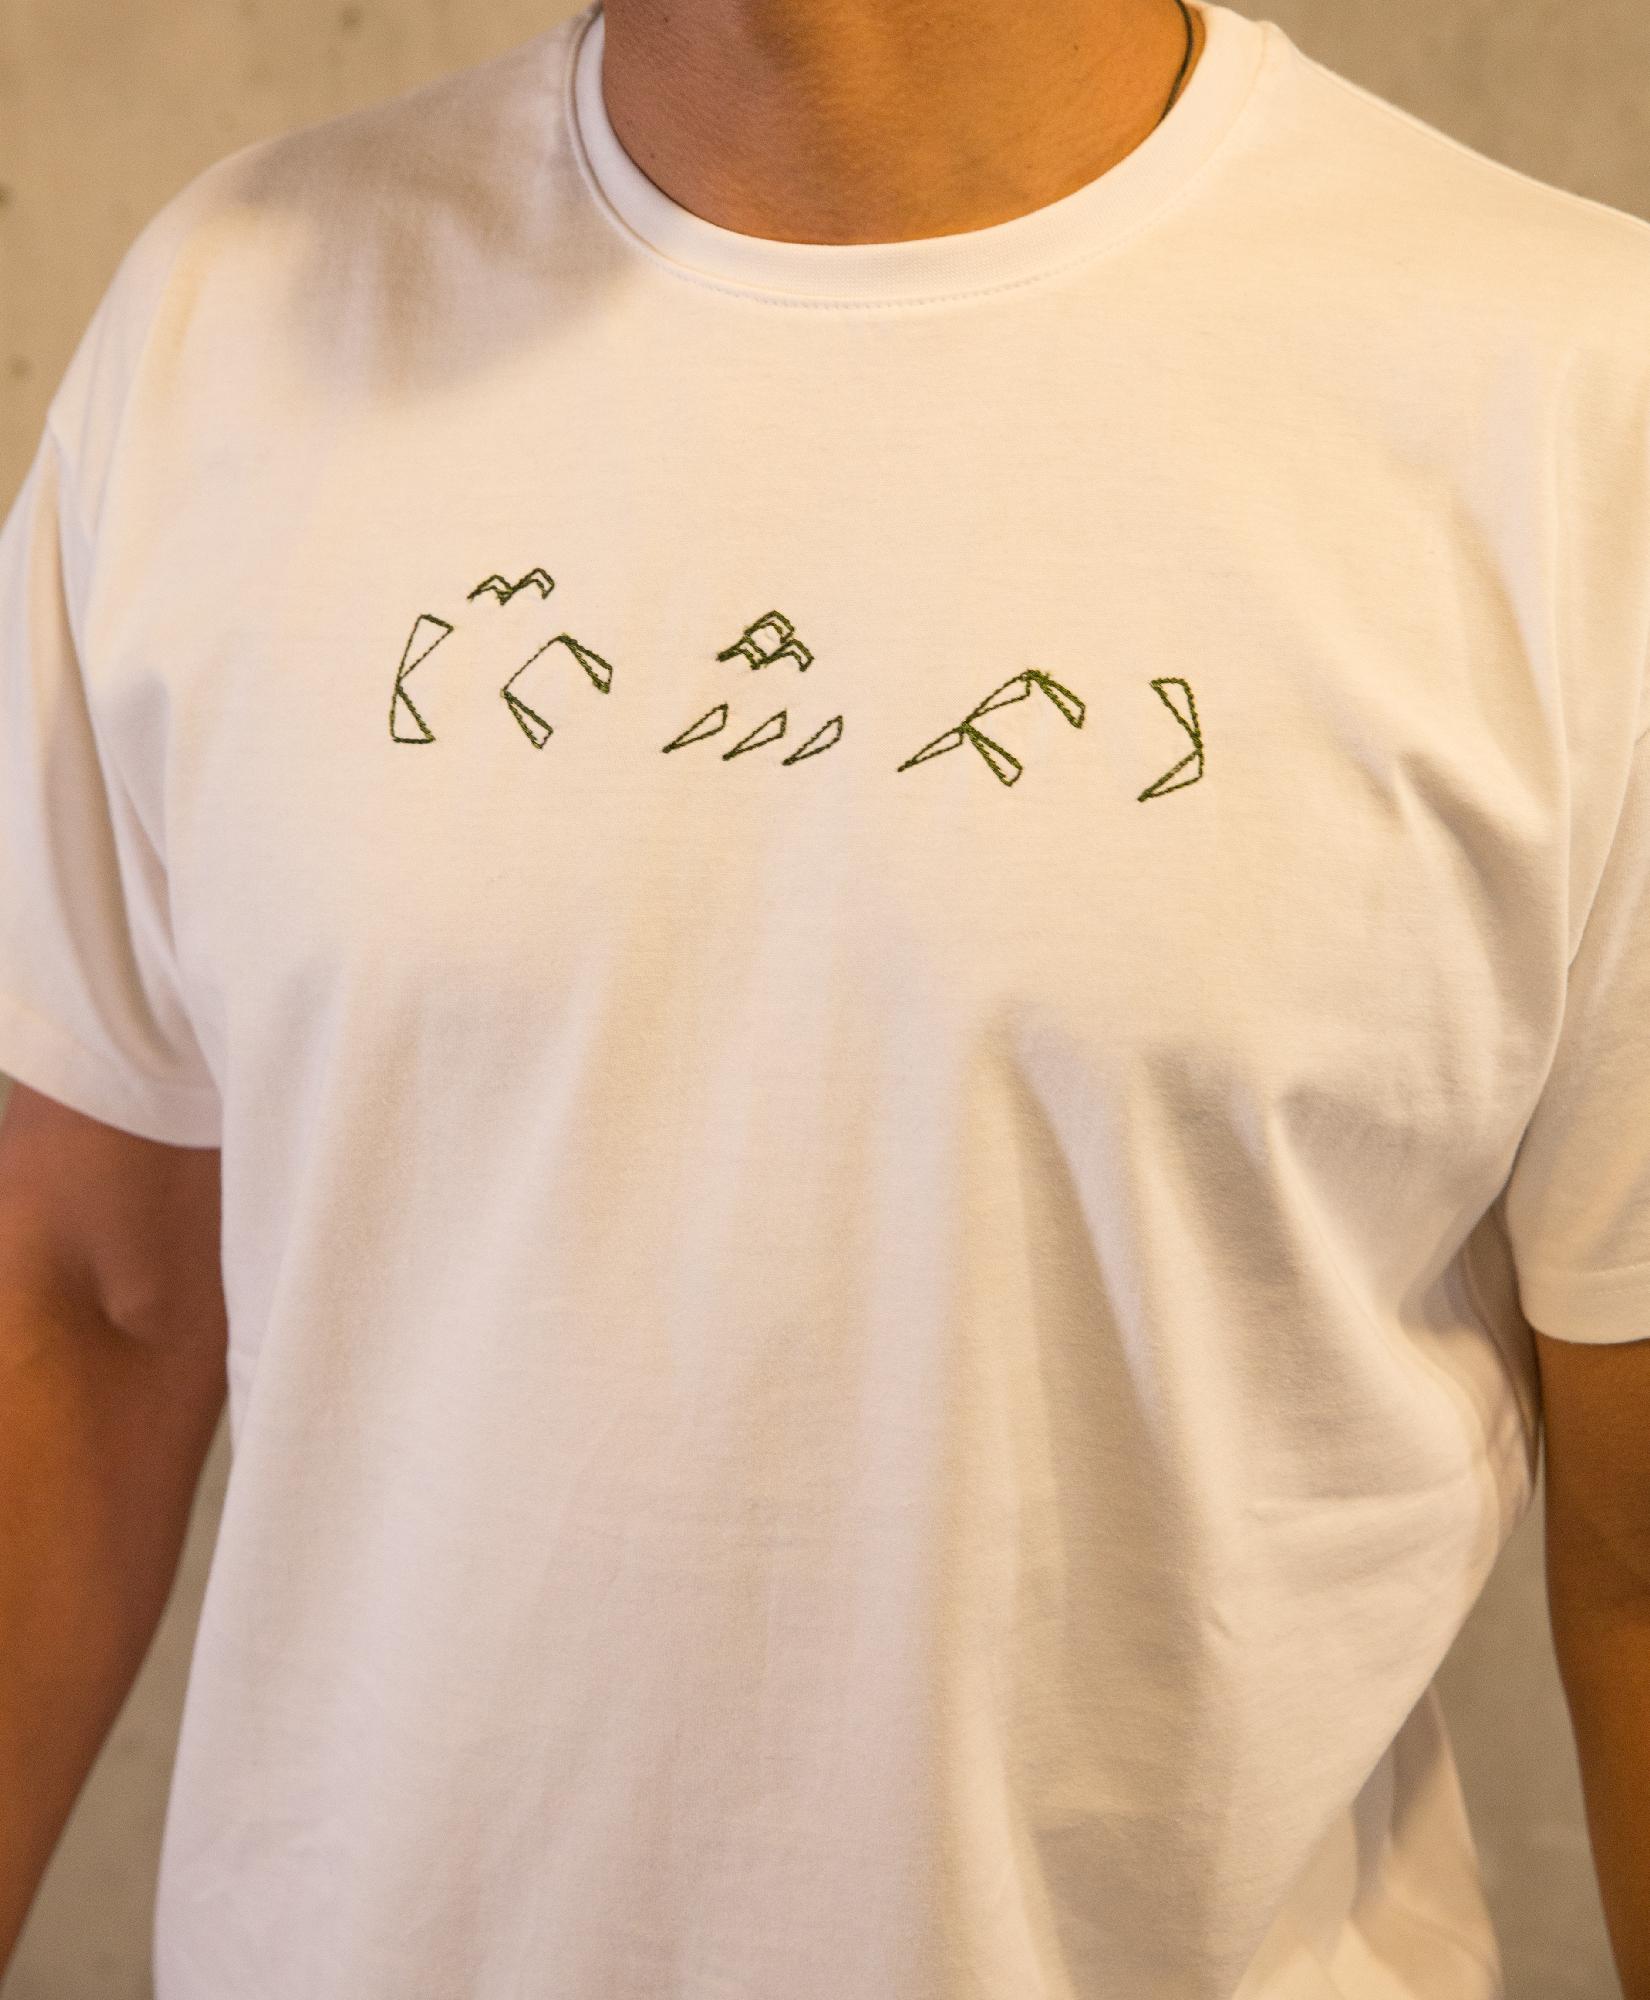 Embroidered Cotton White T-shirt / Stitched Damascus on T-shirt